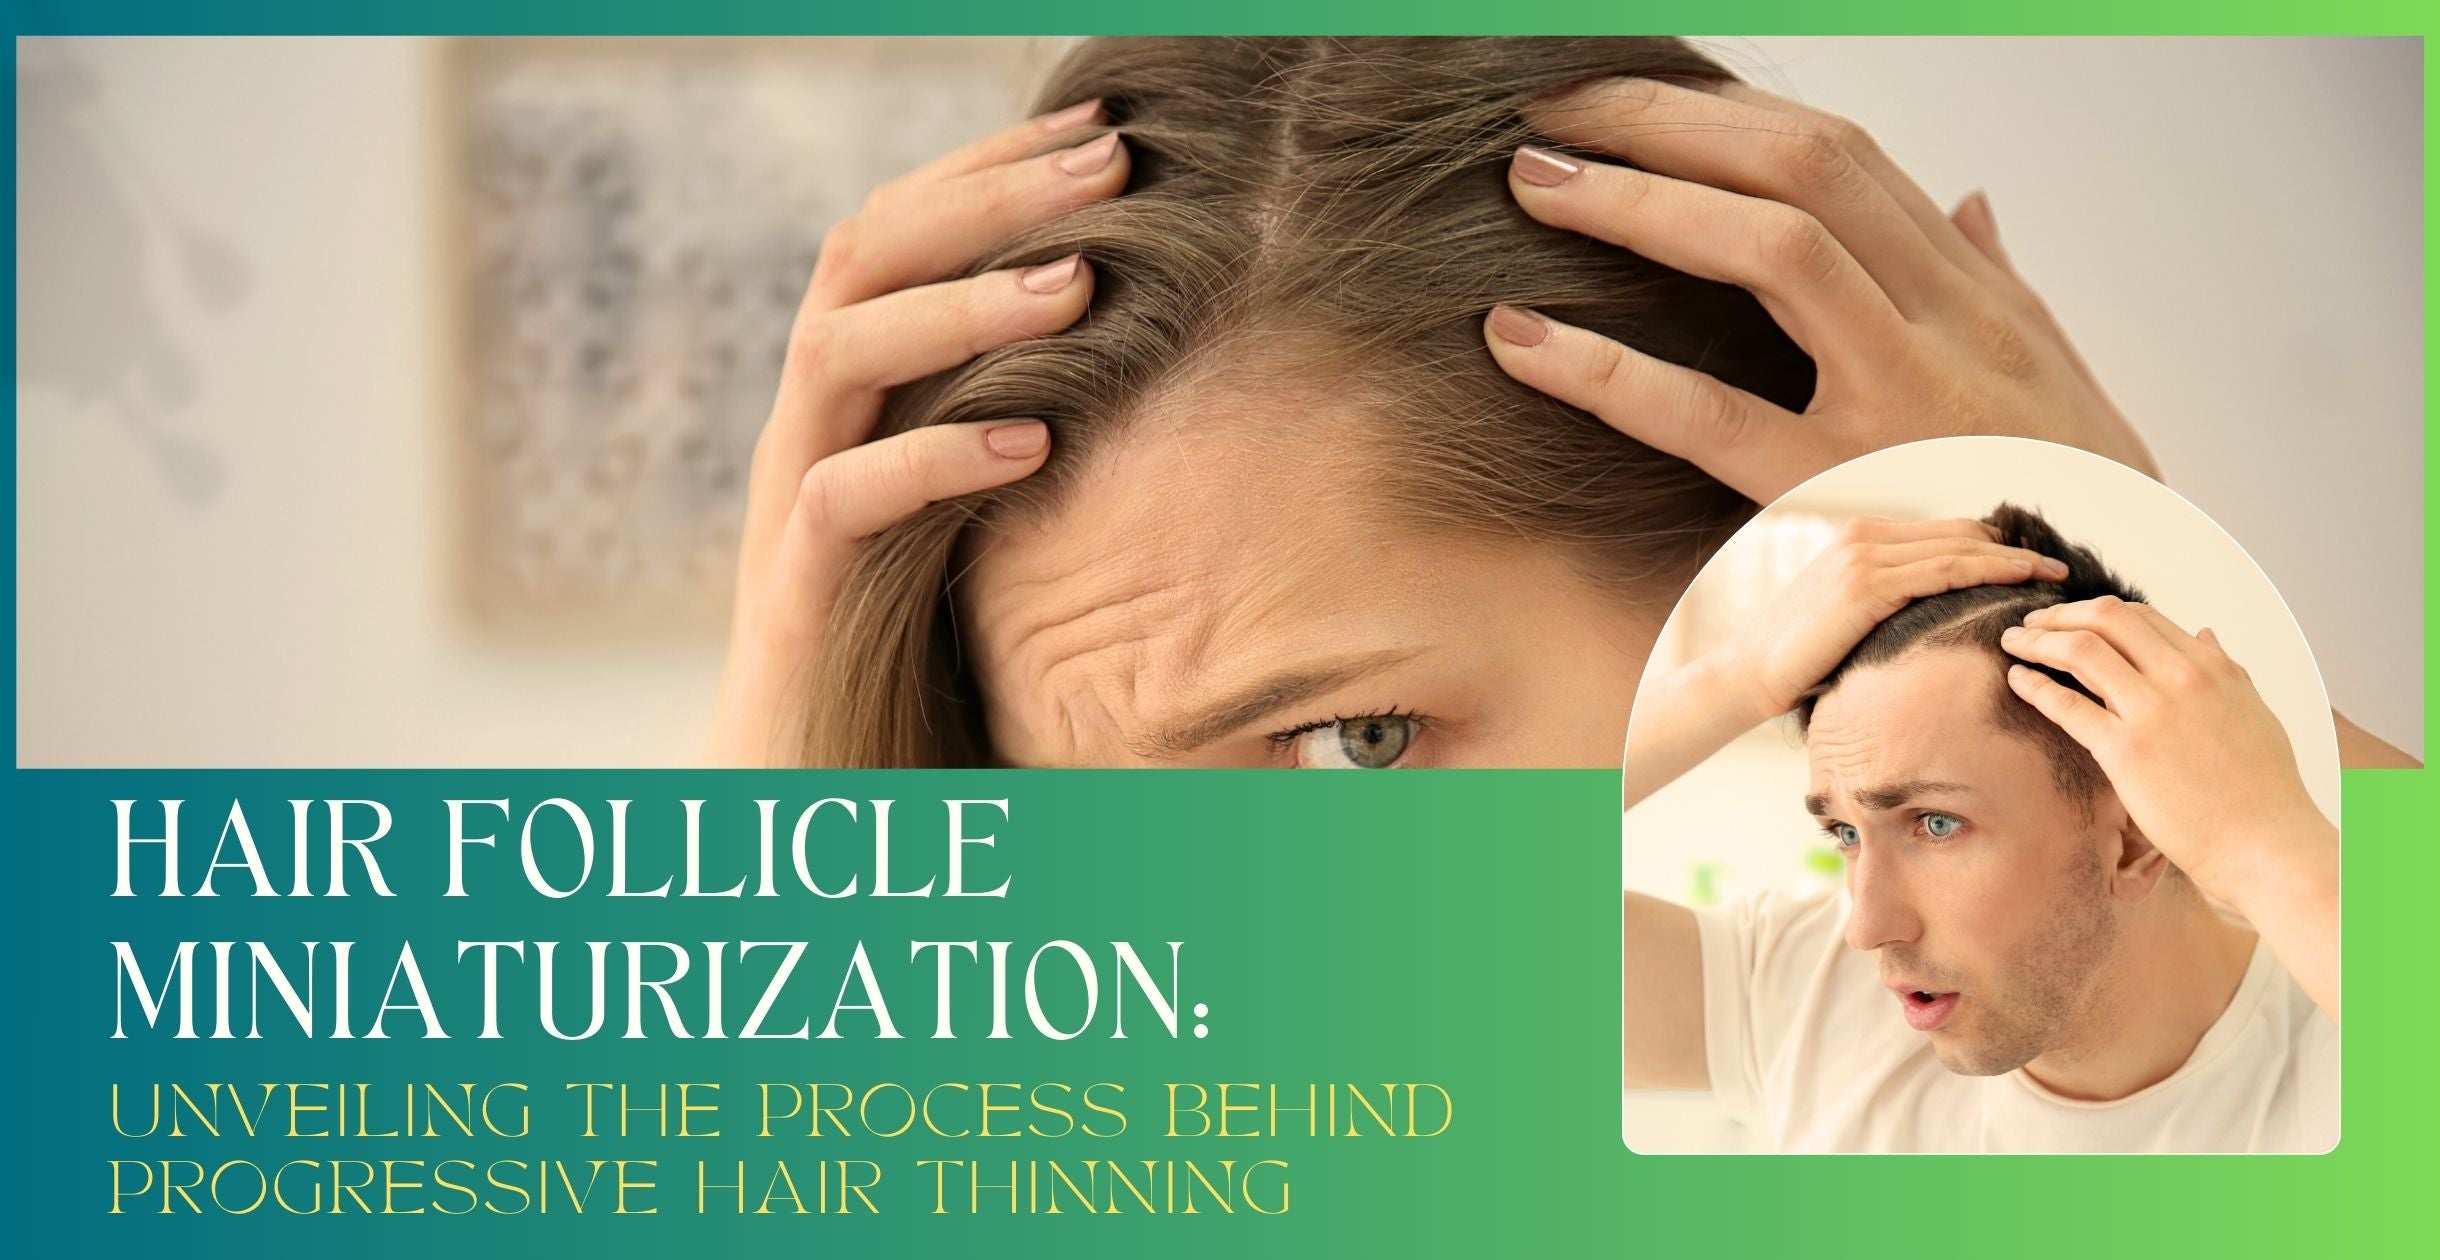 Hair Follicle Miniaturization: Unveiling the Process Behind Progressive Hair Thinning